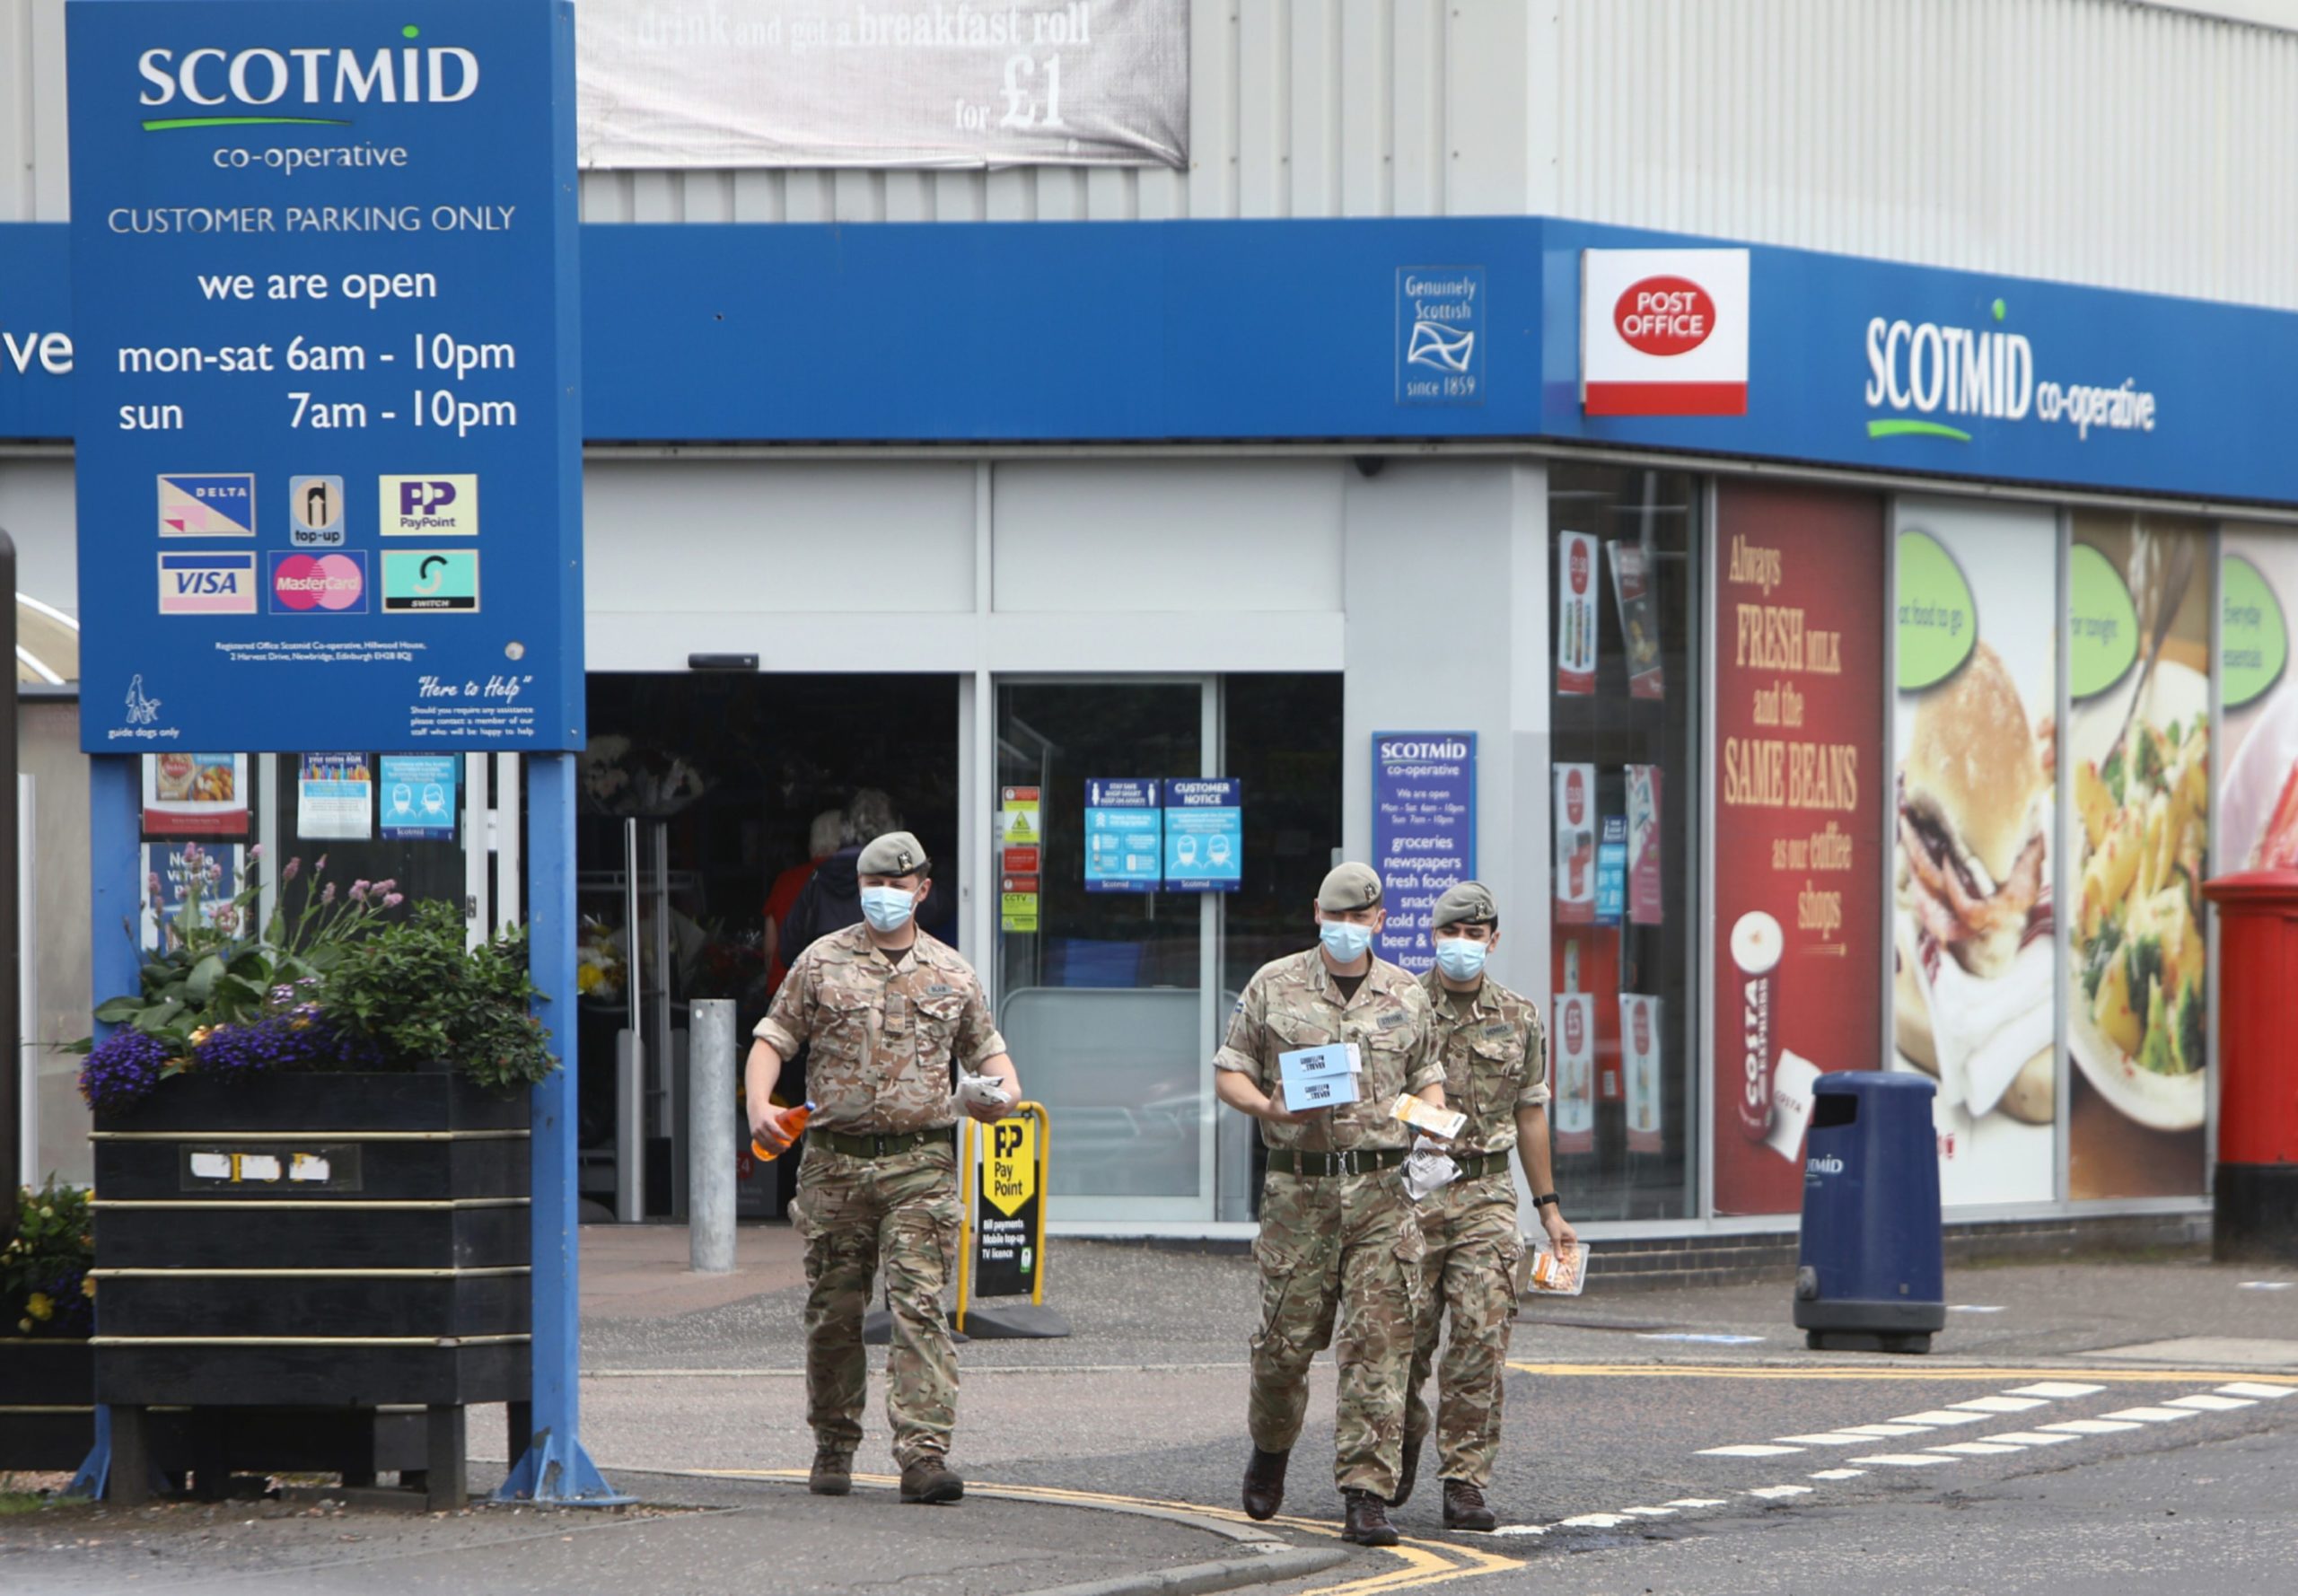 Soldiers at the Scotmid in Coupar Angus in the early days of the outbreak.